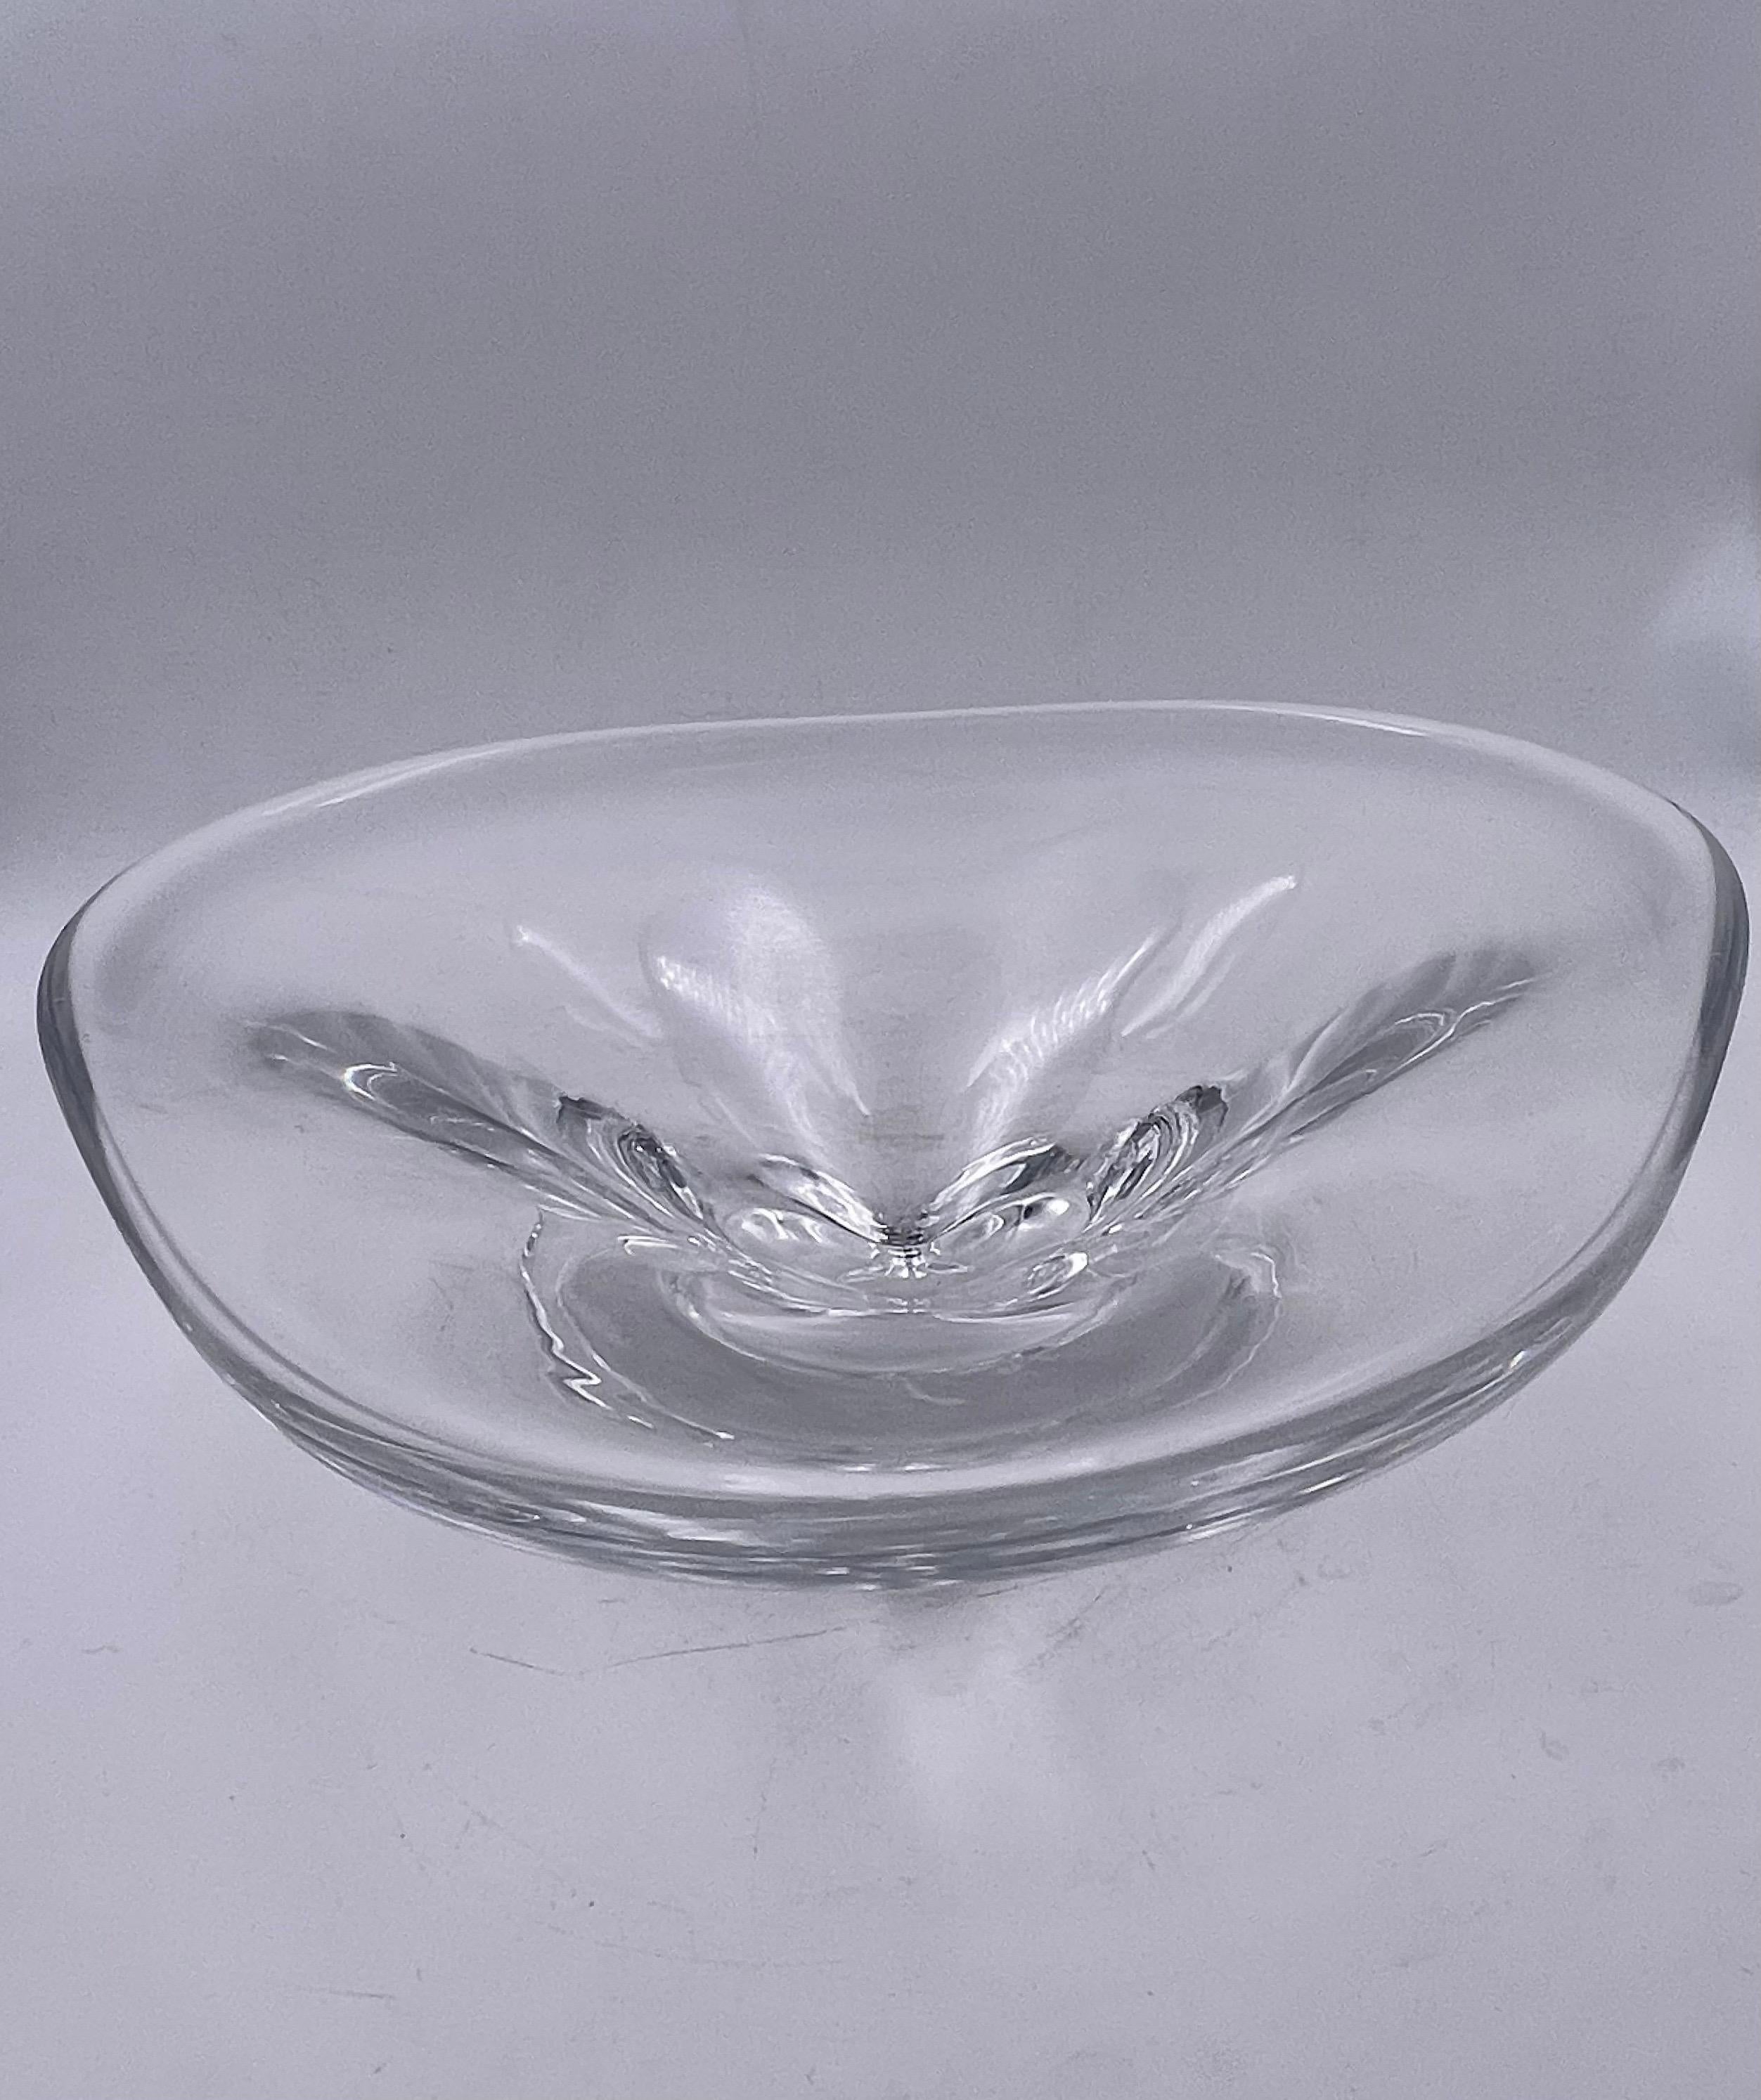 Gorgeous freeform centerpiece bowl signed by Orrefors of Sweden in great condition, no chips or cracks.